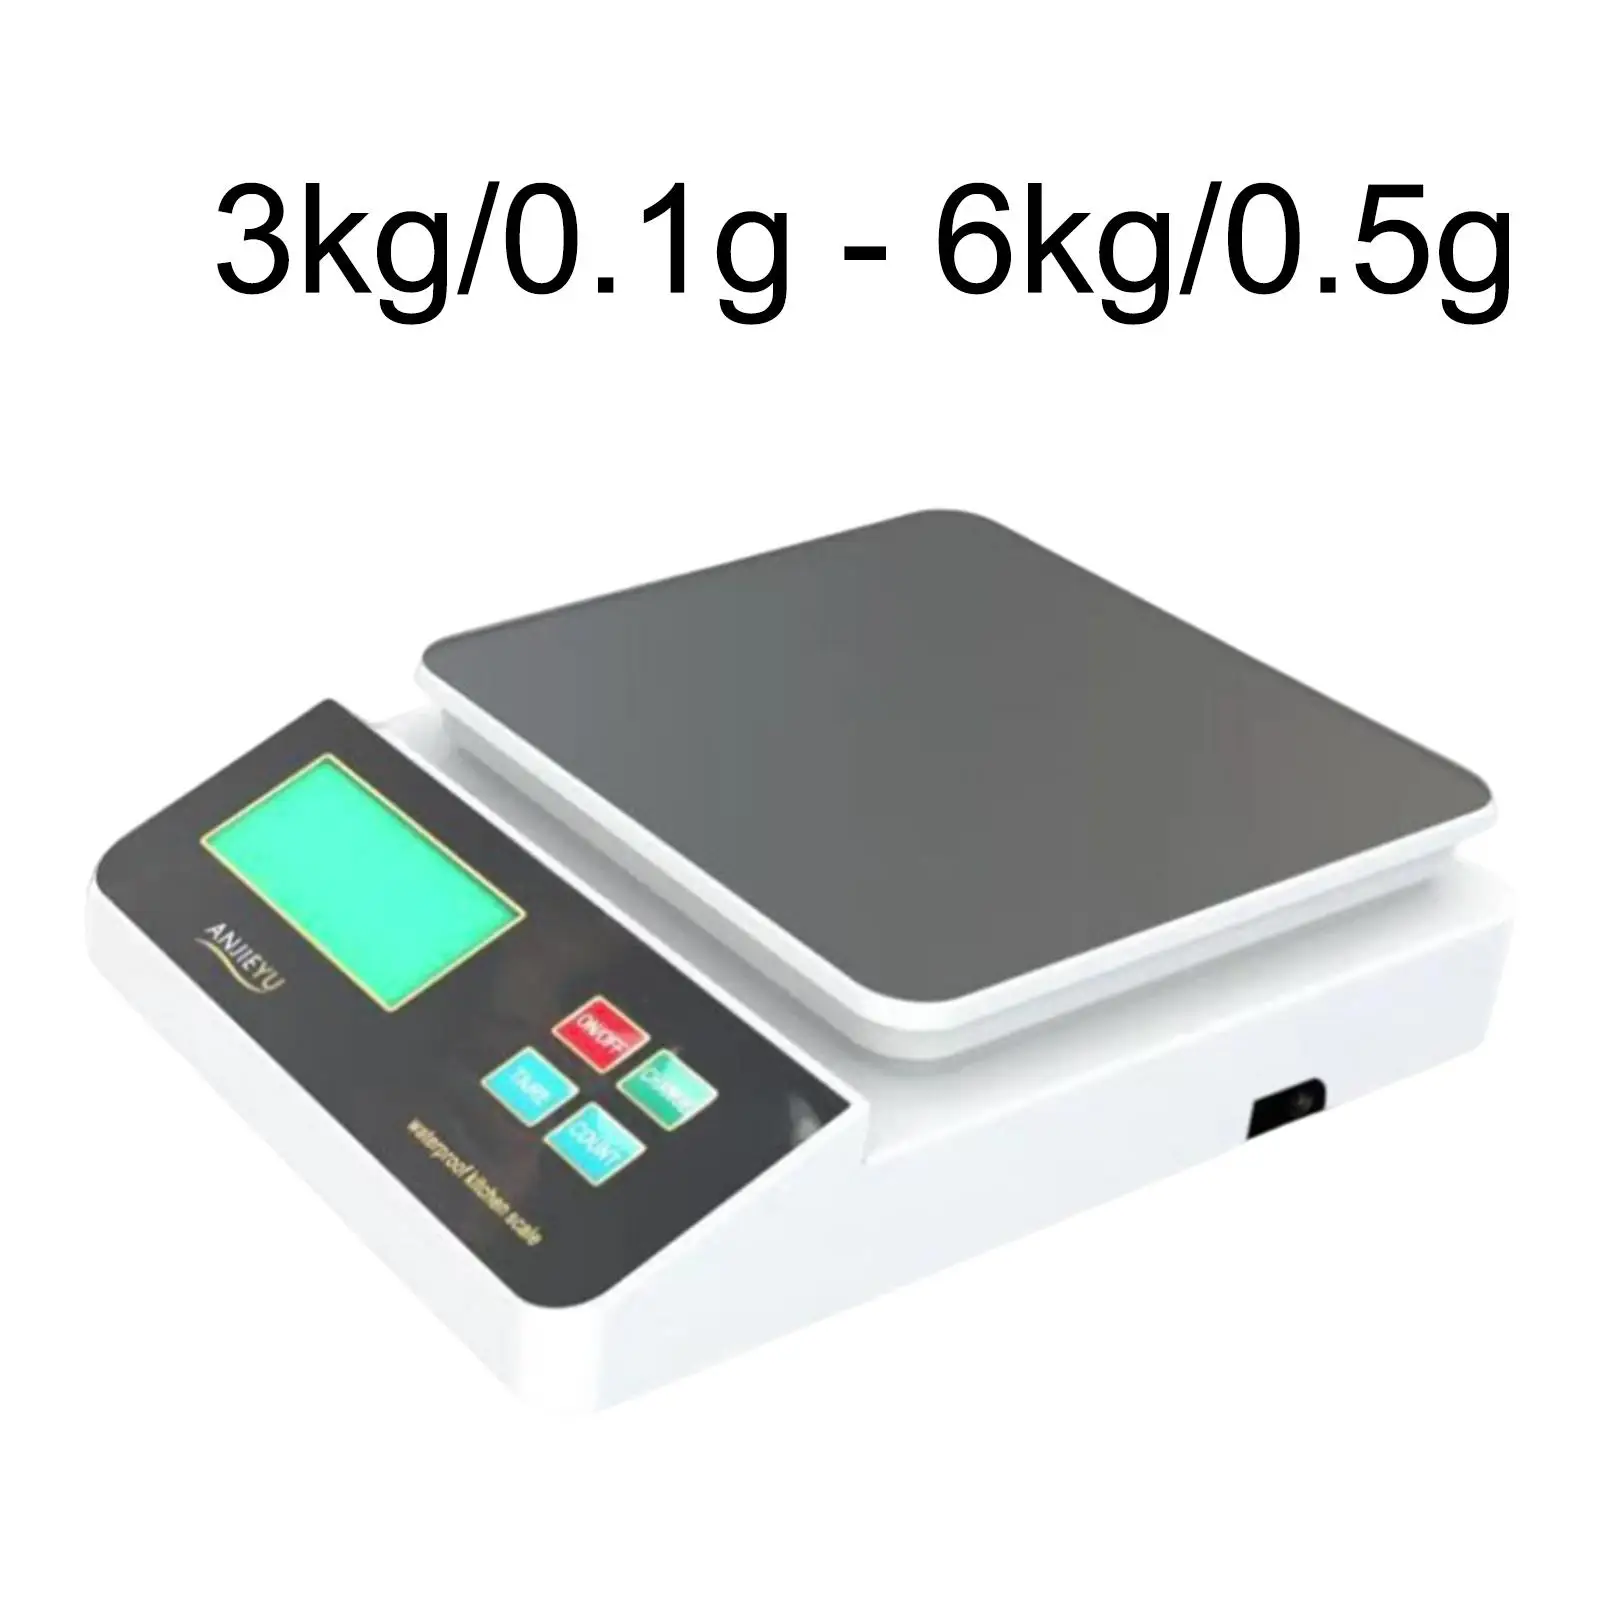 Waterproof Coffee Bean Scale LCD Display Electric Cooking Scales Food Scale